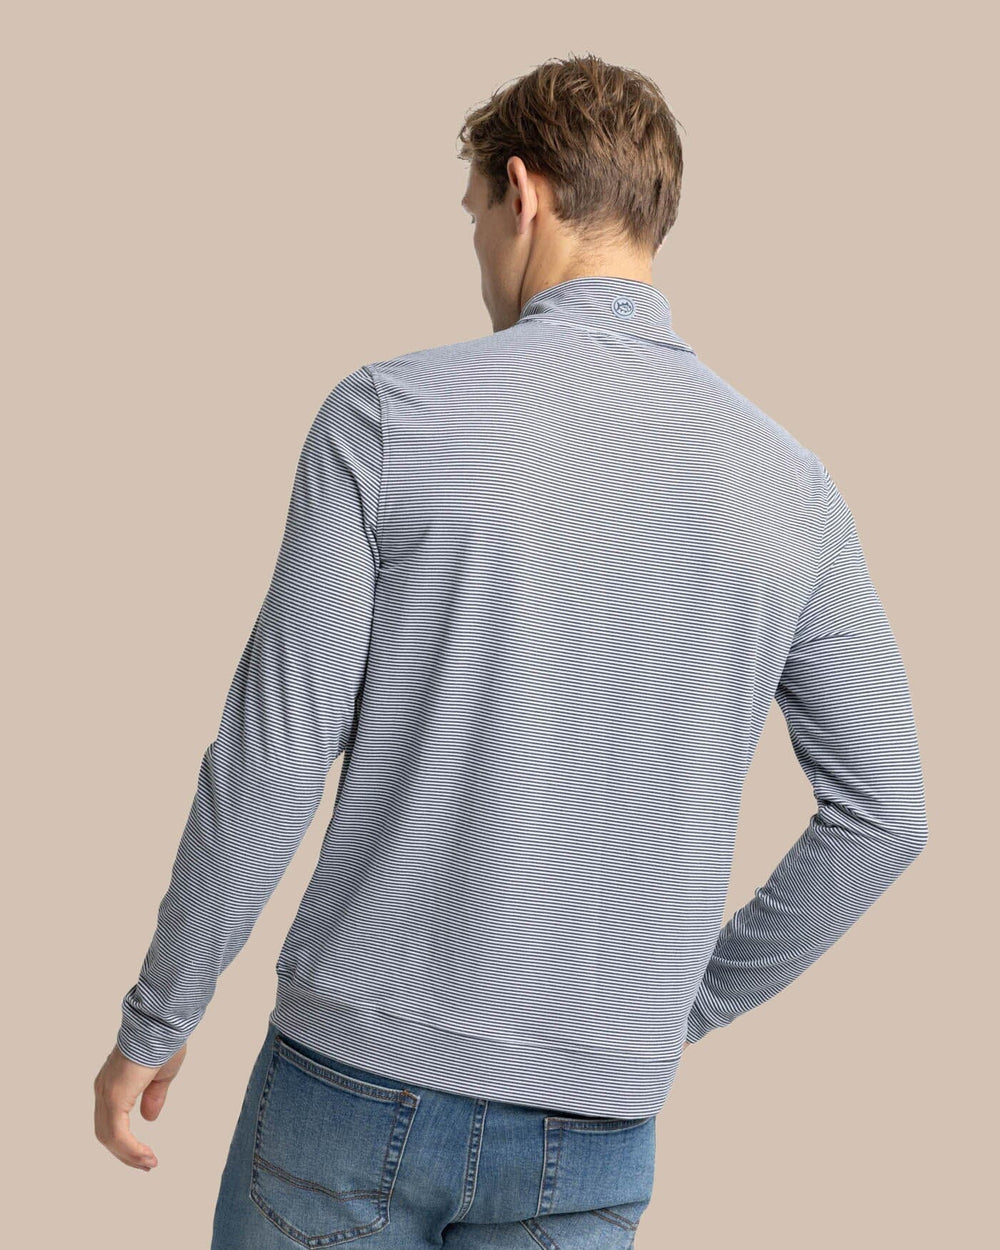 The back view of the Southern Tide Cruiser Micro-Stripe Heather Quarter Zip by Southern Tide - Heather Black